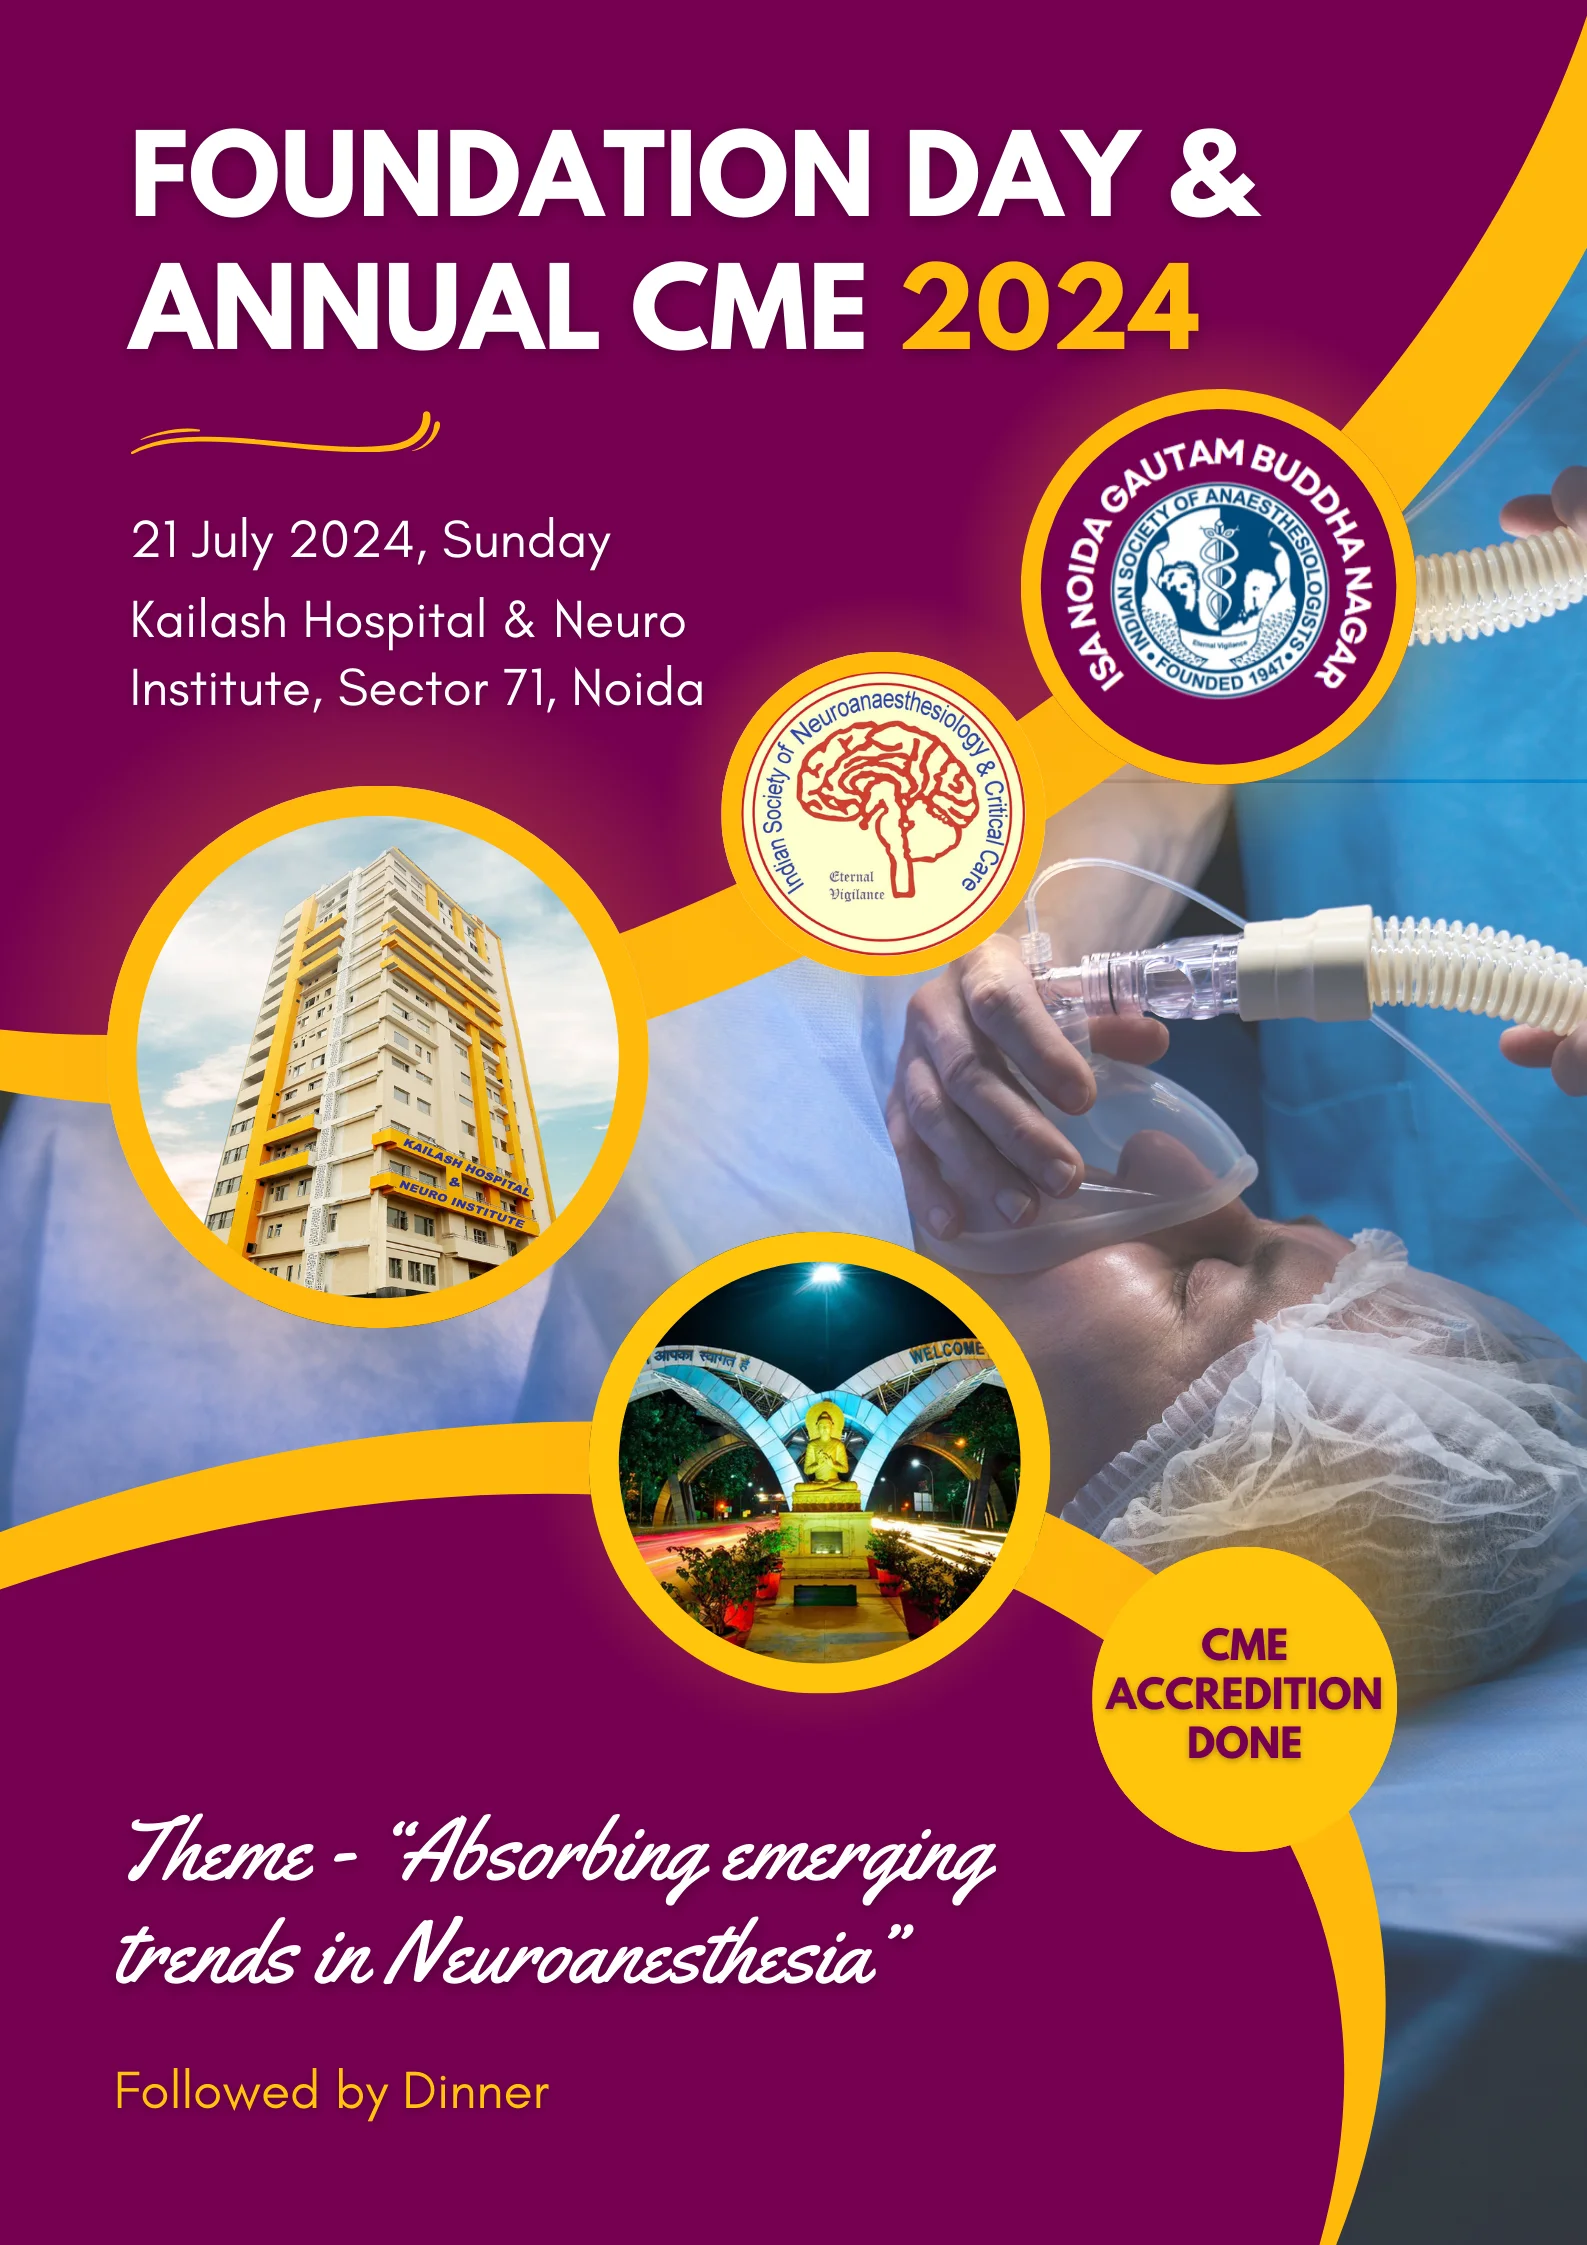 FOUNDATION DAY ANNUAL CME 2024